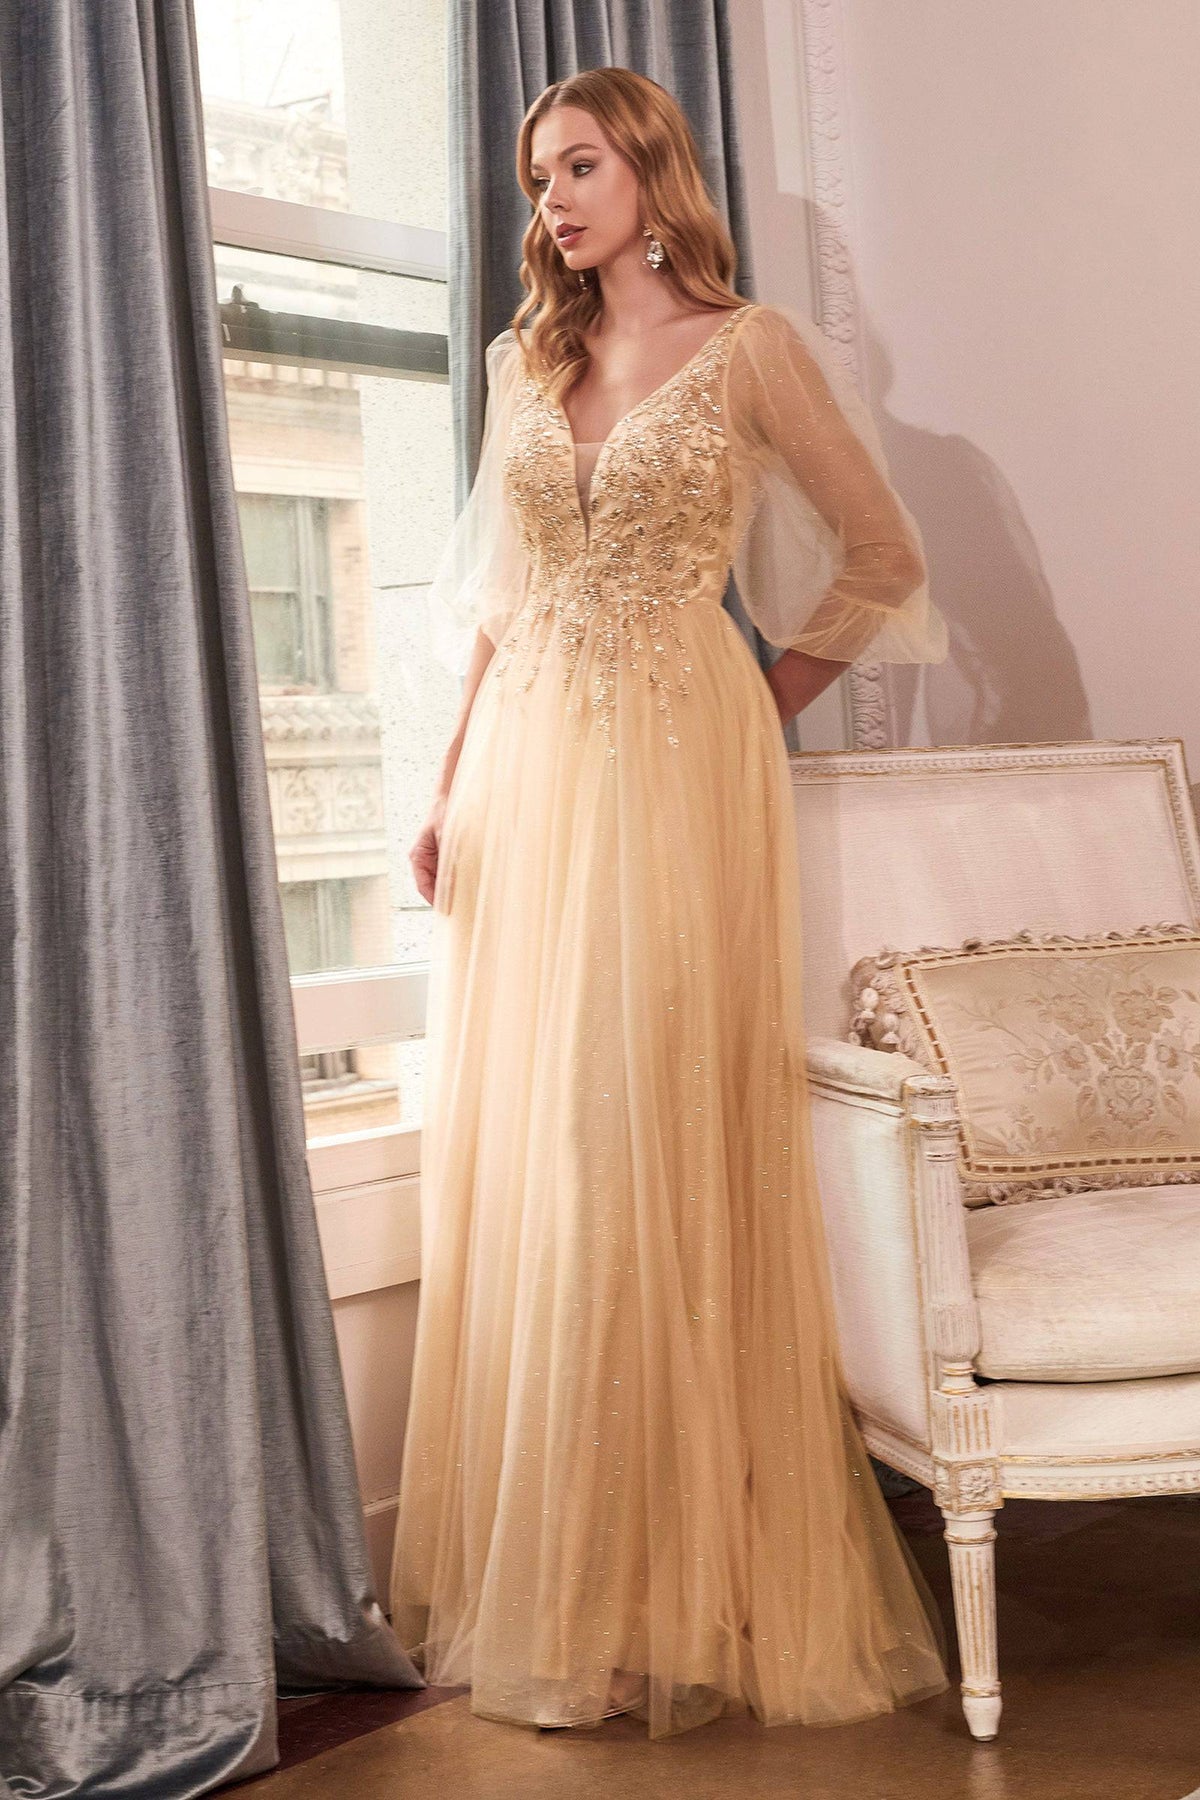 Gorgeous Open Back Long Champagne Lace Prom Dress, Champagne Lace